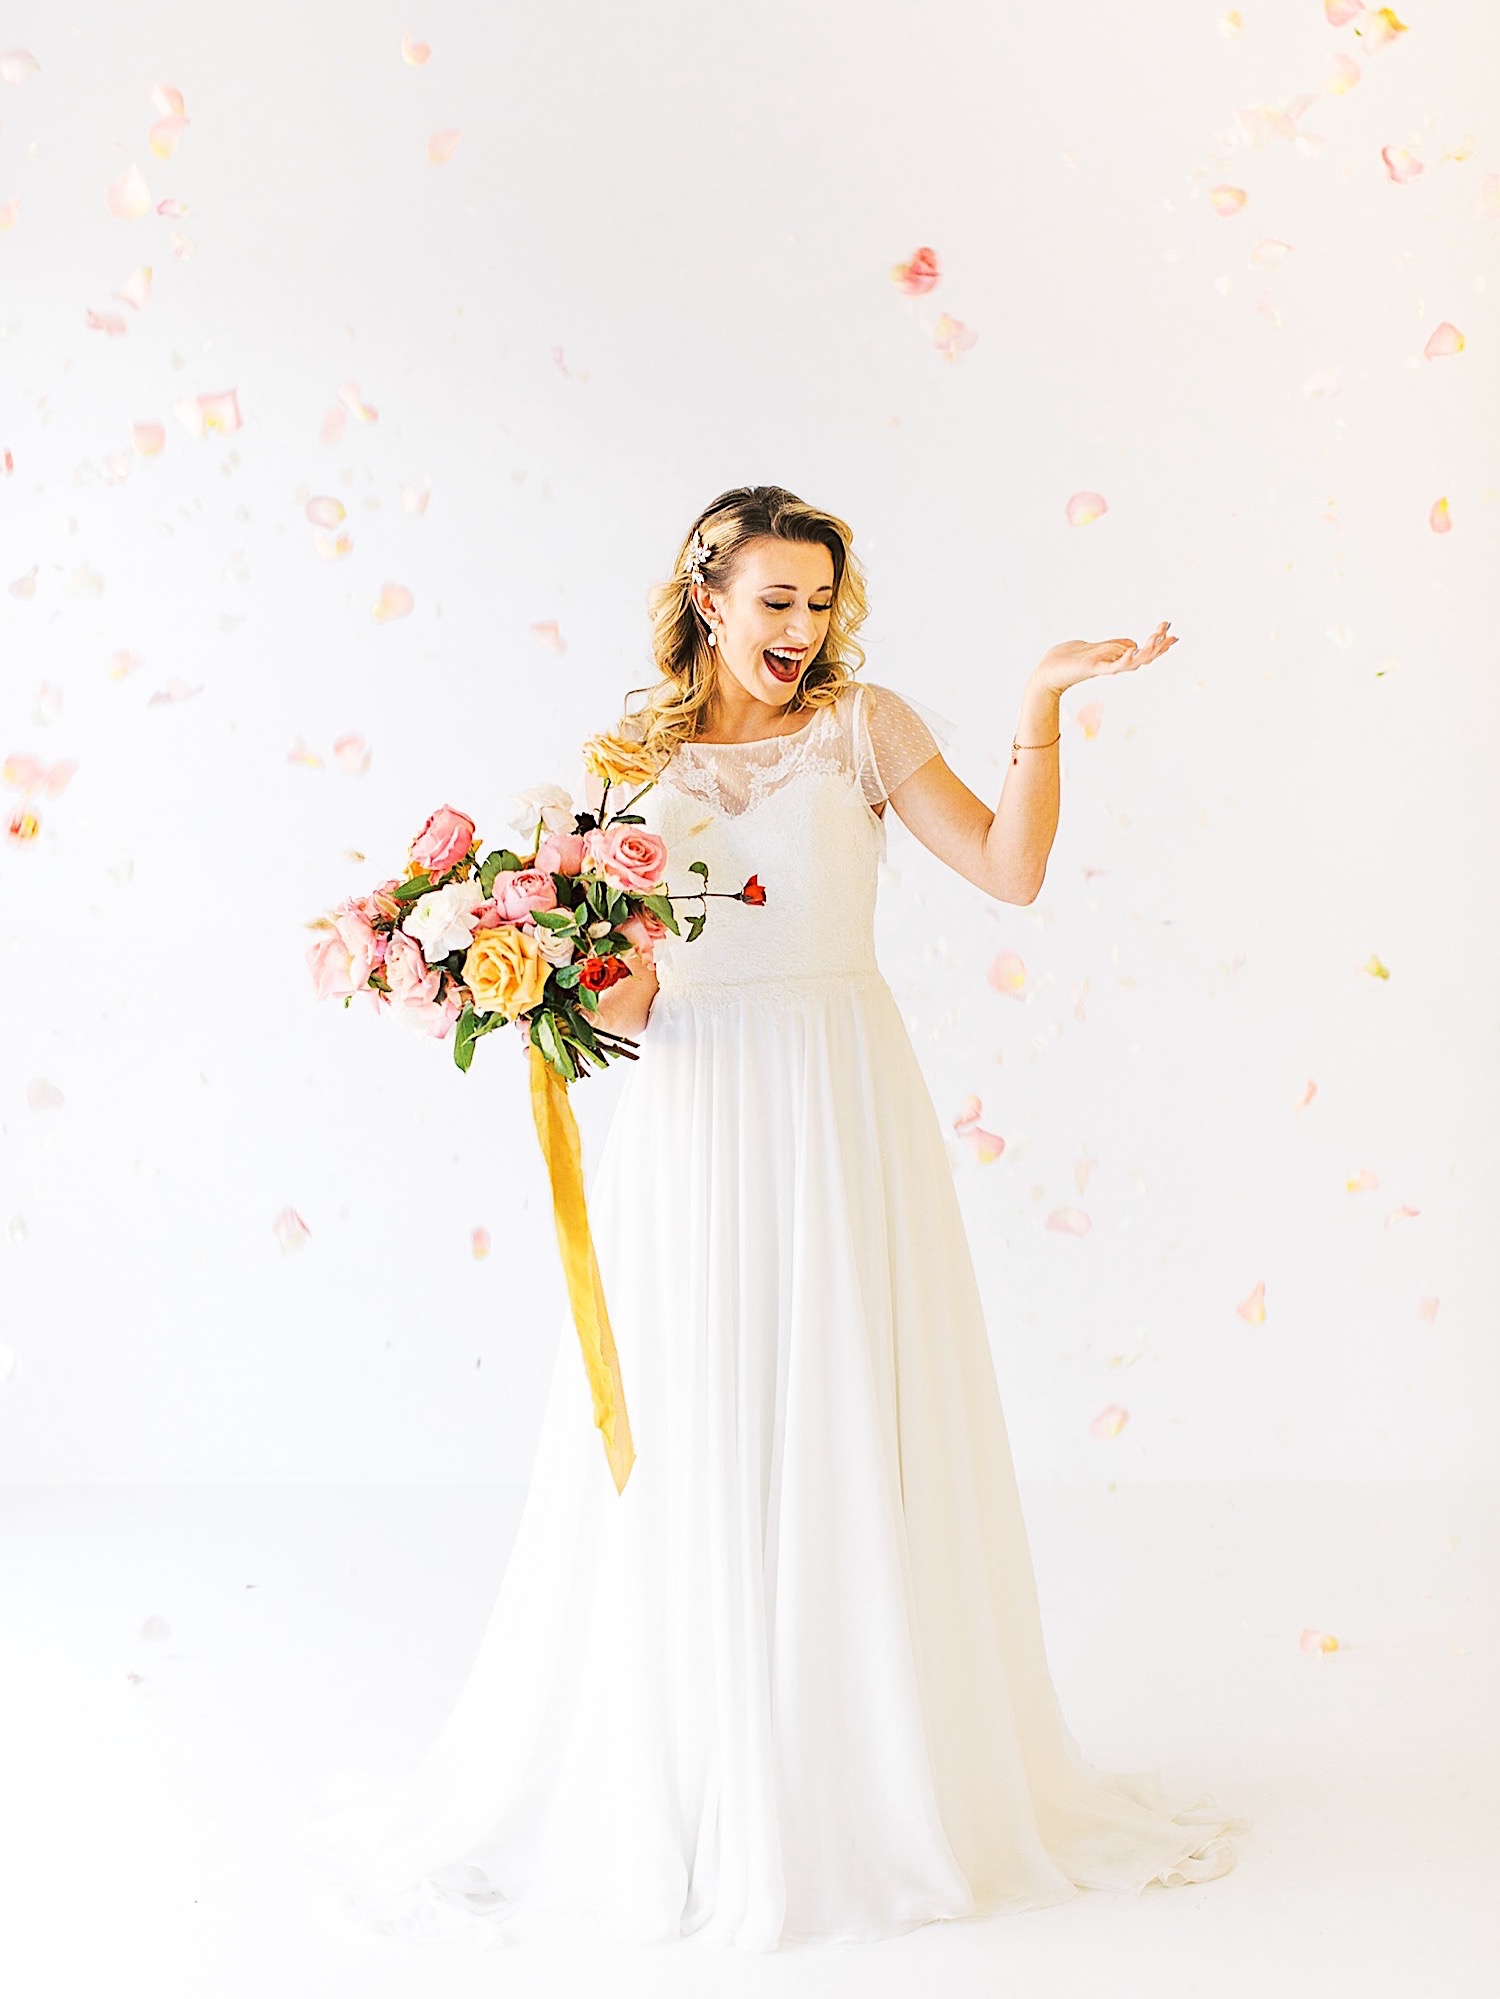 Colorful Floral NC Raleigh Wedding Inspiration